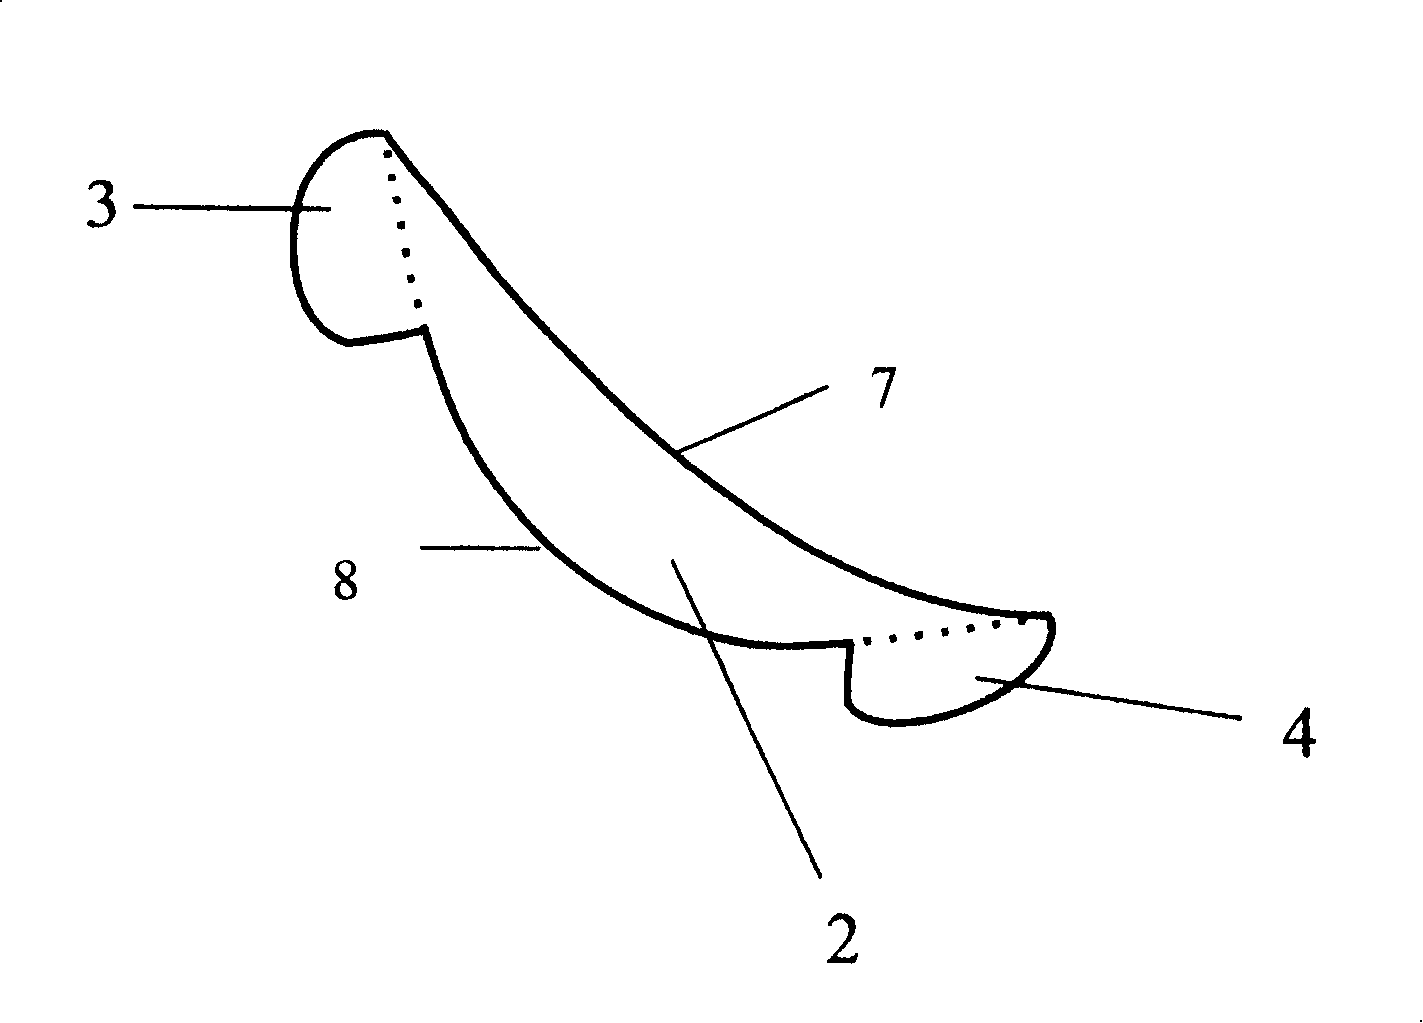 Shaping-area limiting device for angle of mandible and making method therefor